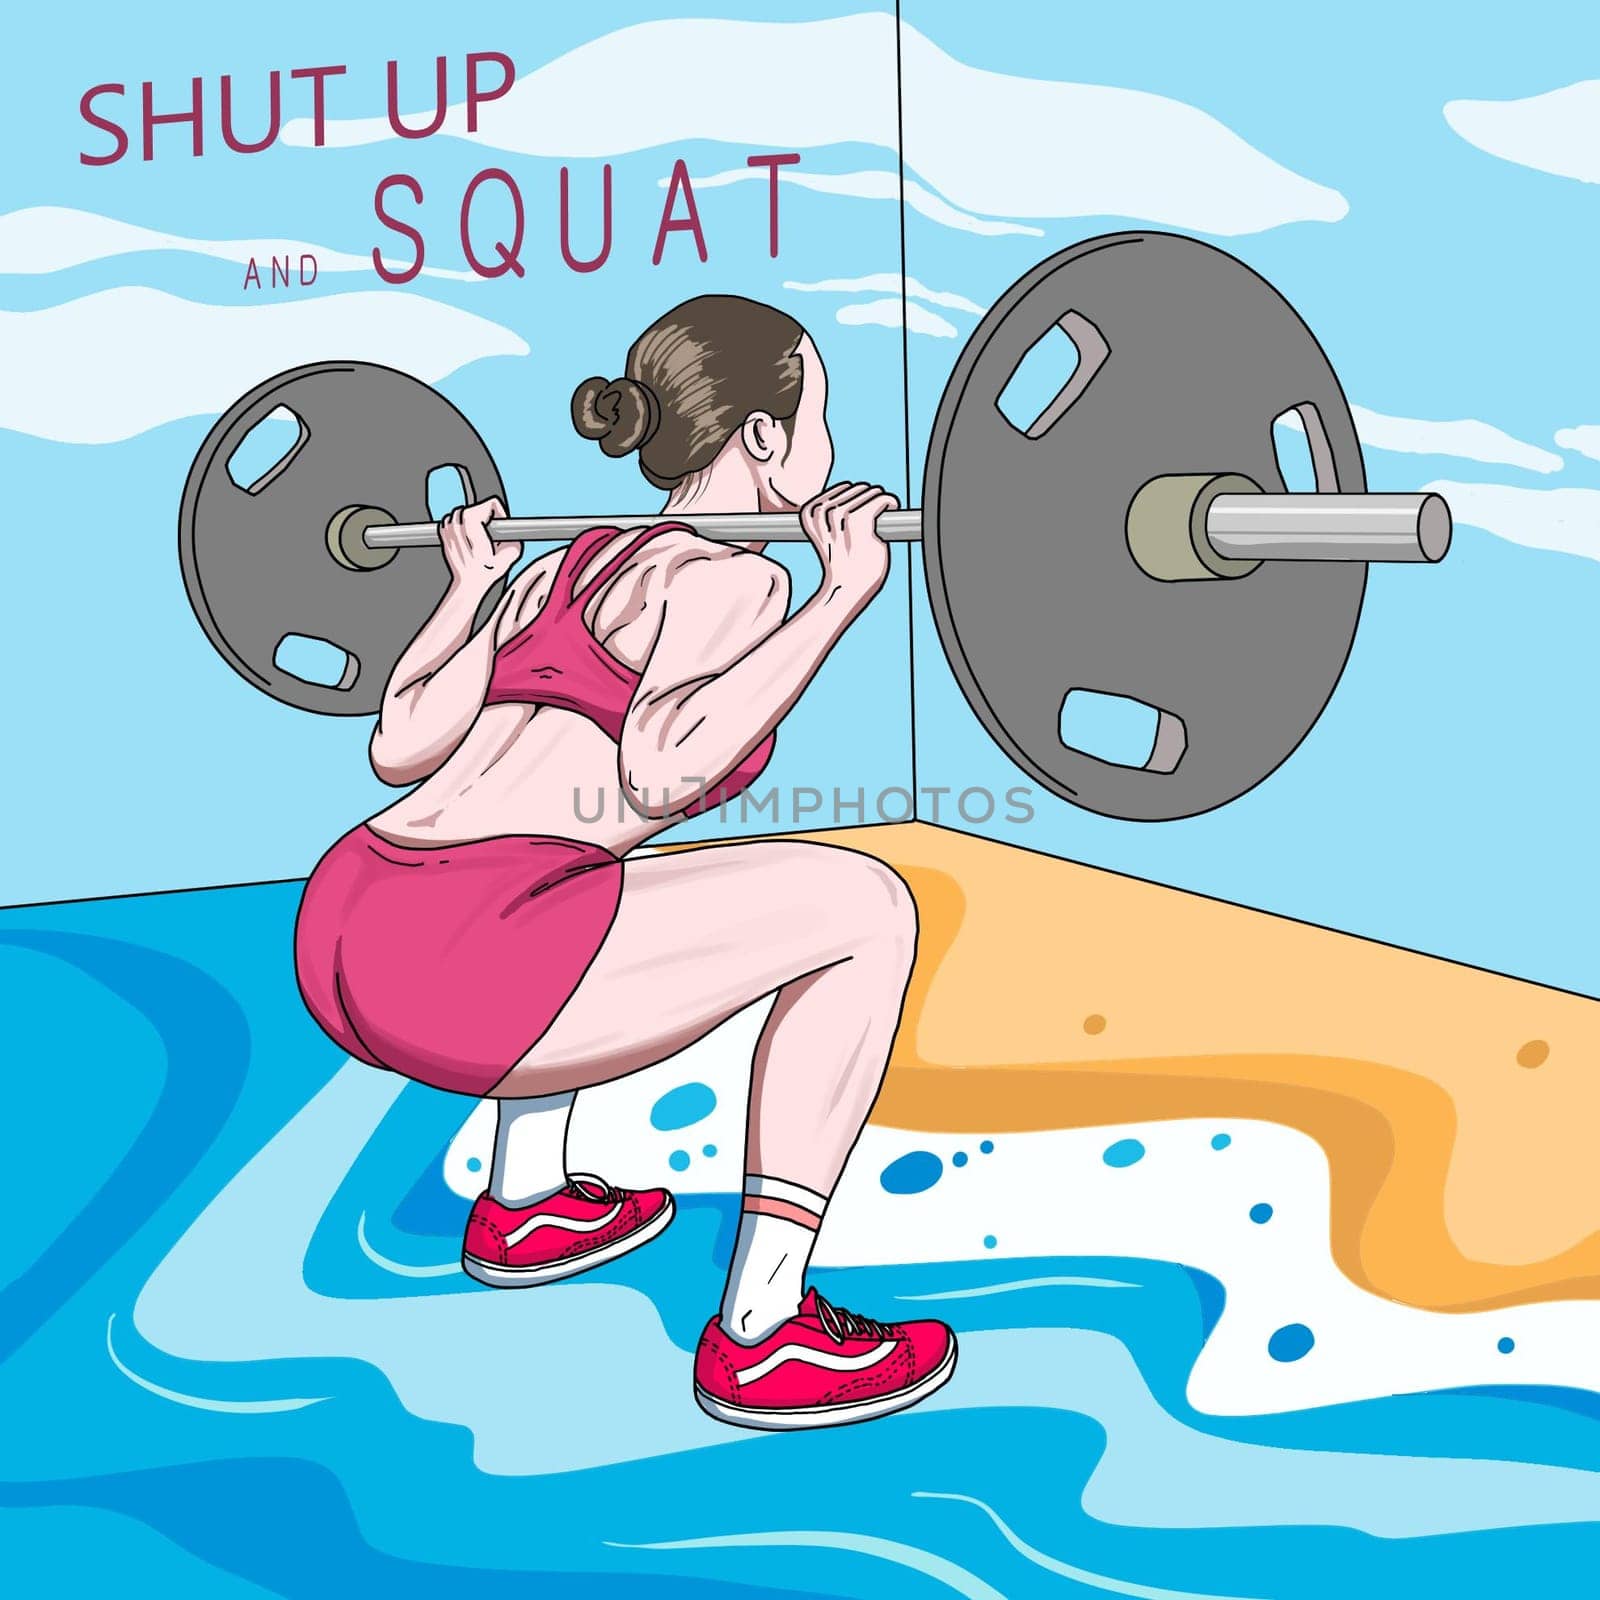 organ,art,facial,expression,cartoon,happy,vertebrate,hairstyle,gesture,mammal,leisure,barbell,exercise,illustration,powerlifting,squat,weightlifter,weightlifting,weights